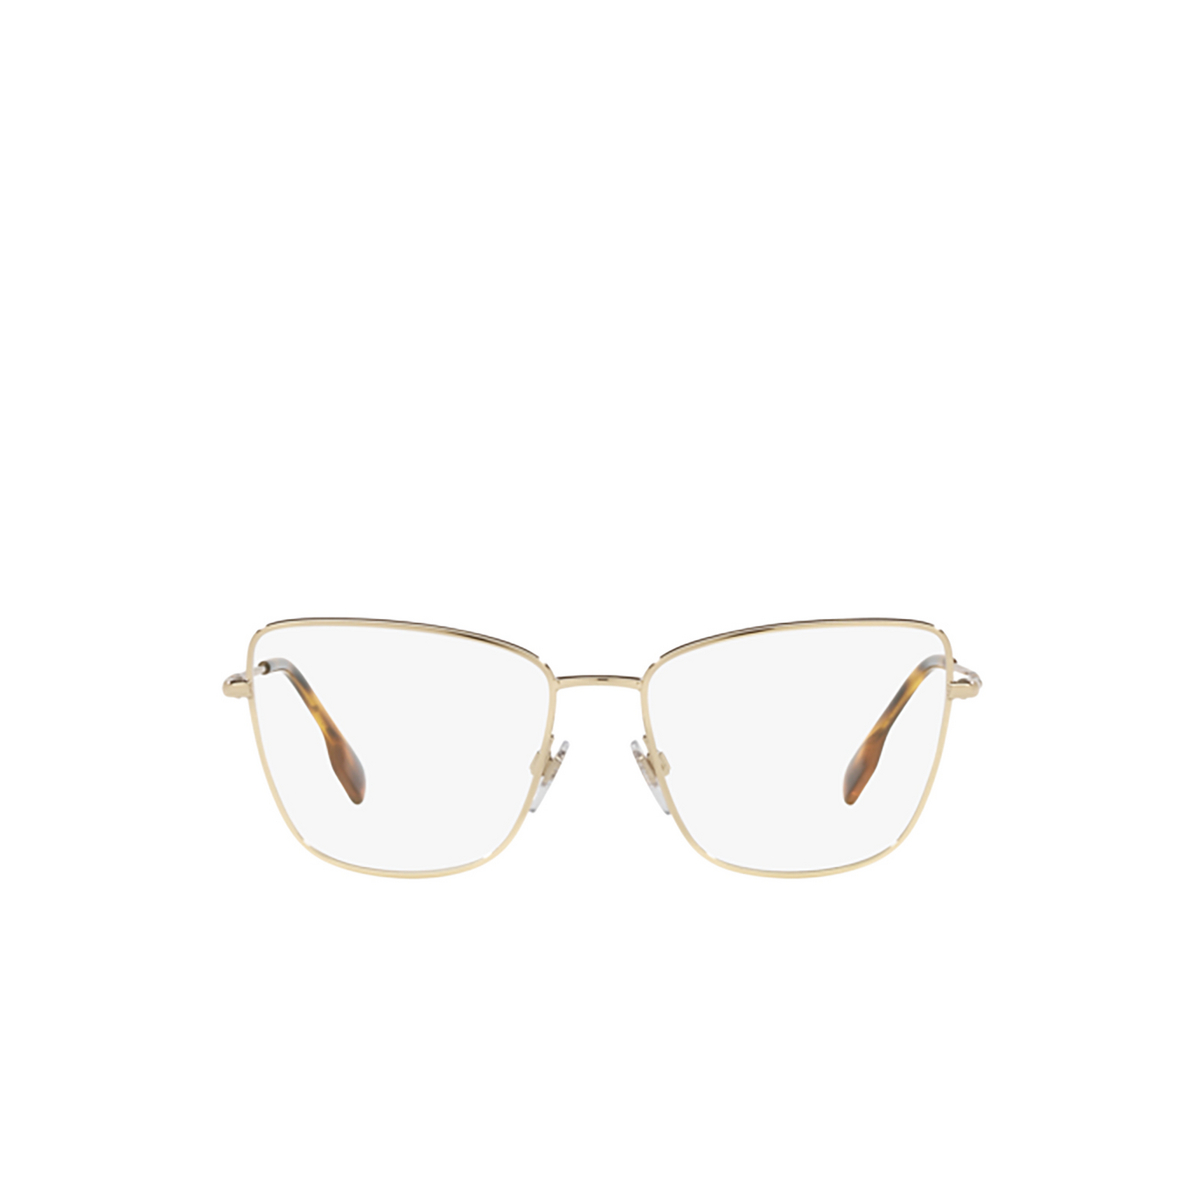 Burberry BEA Eyeglasses 1109 Light Gold - front view